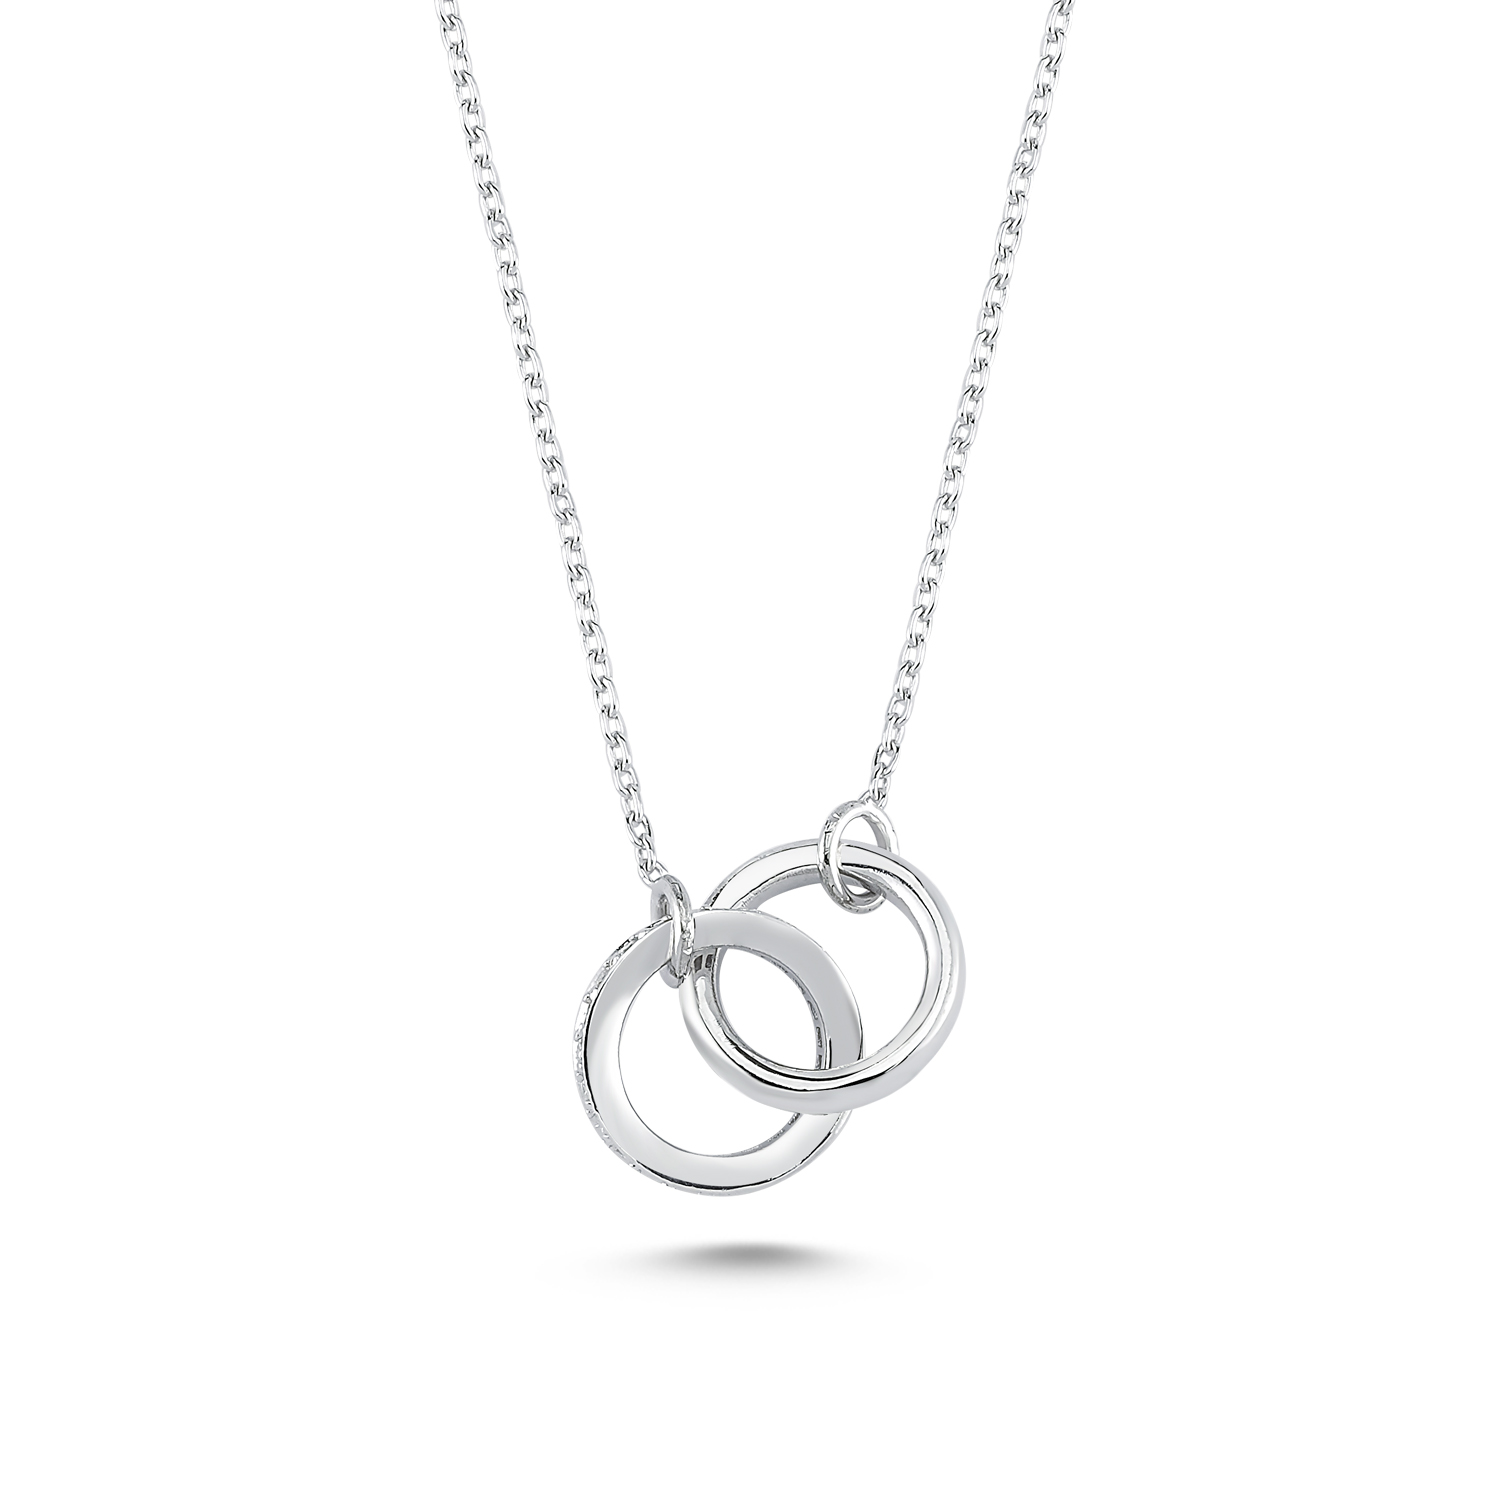 Double Ring Diamond Necklace